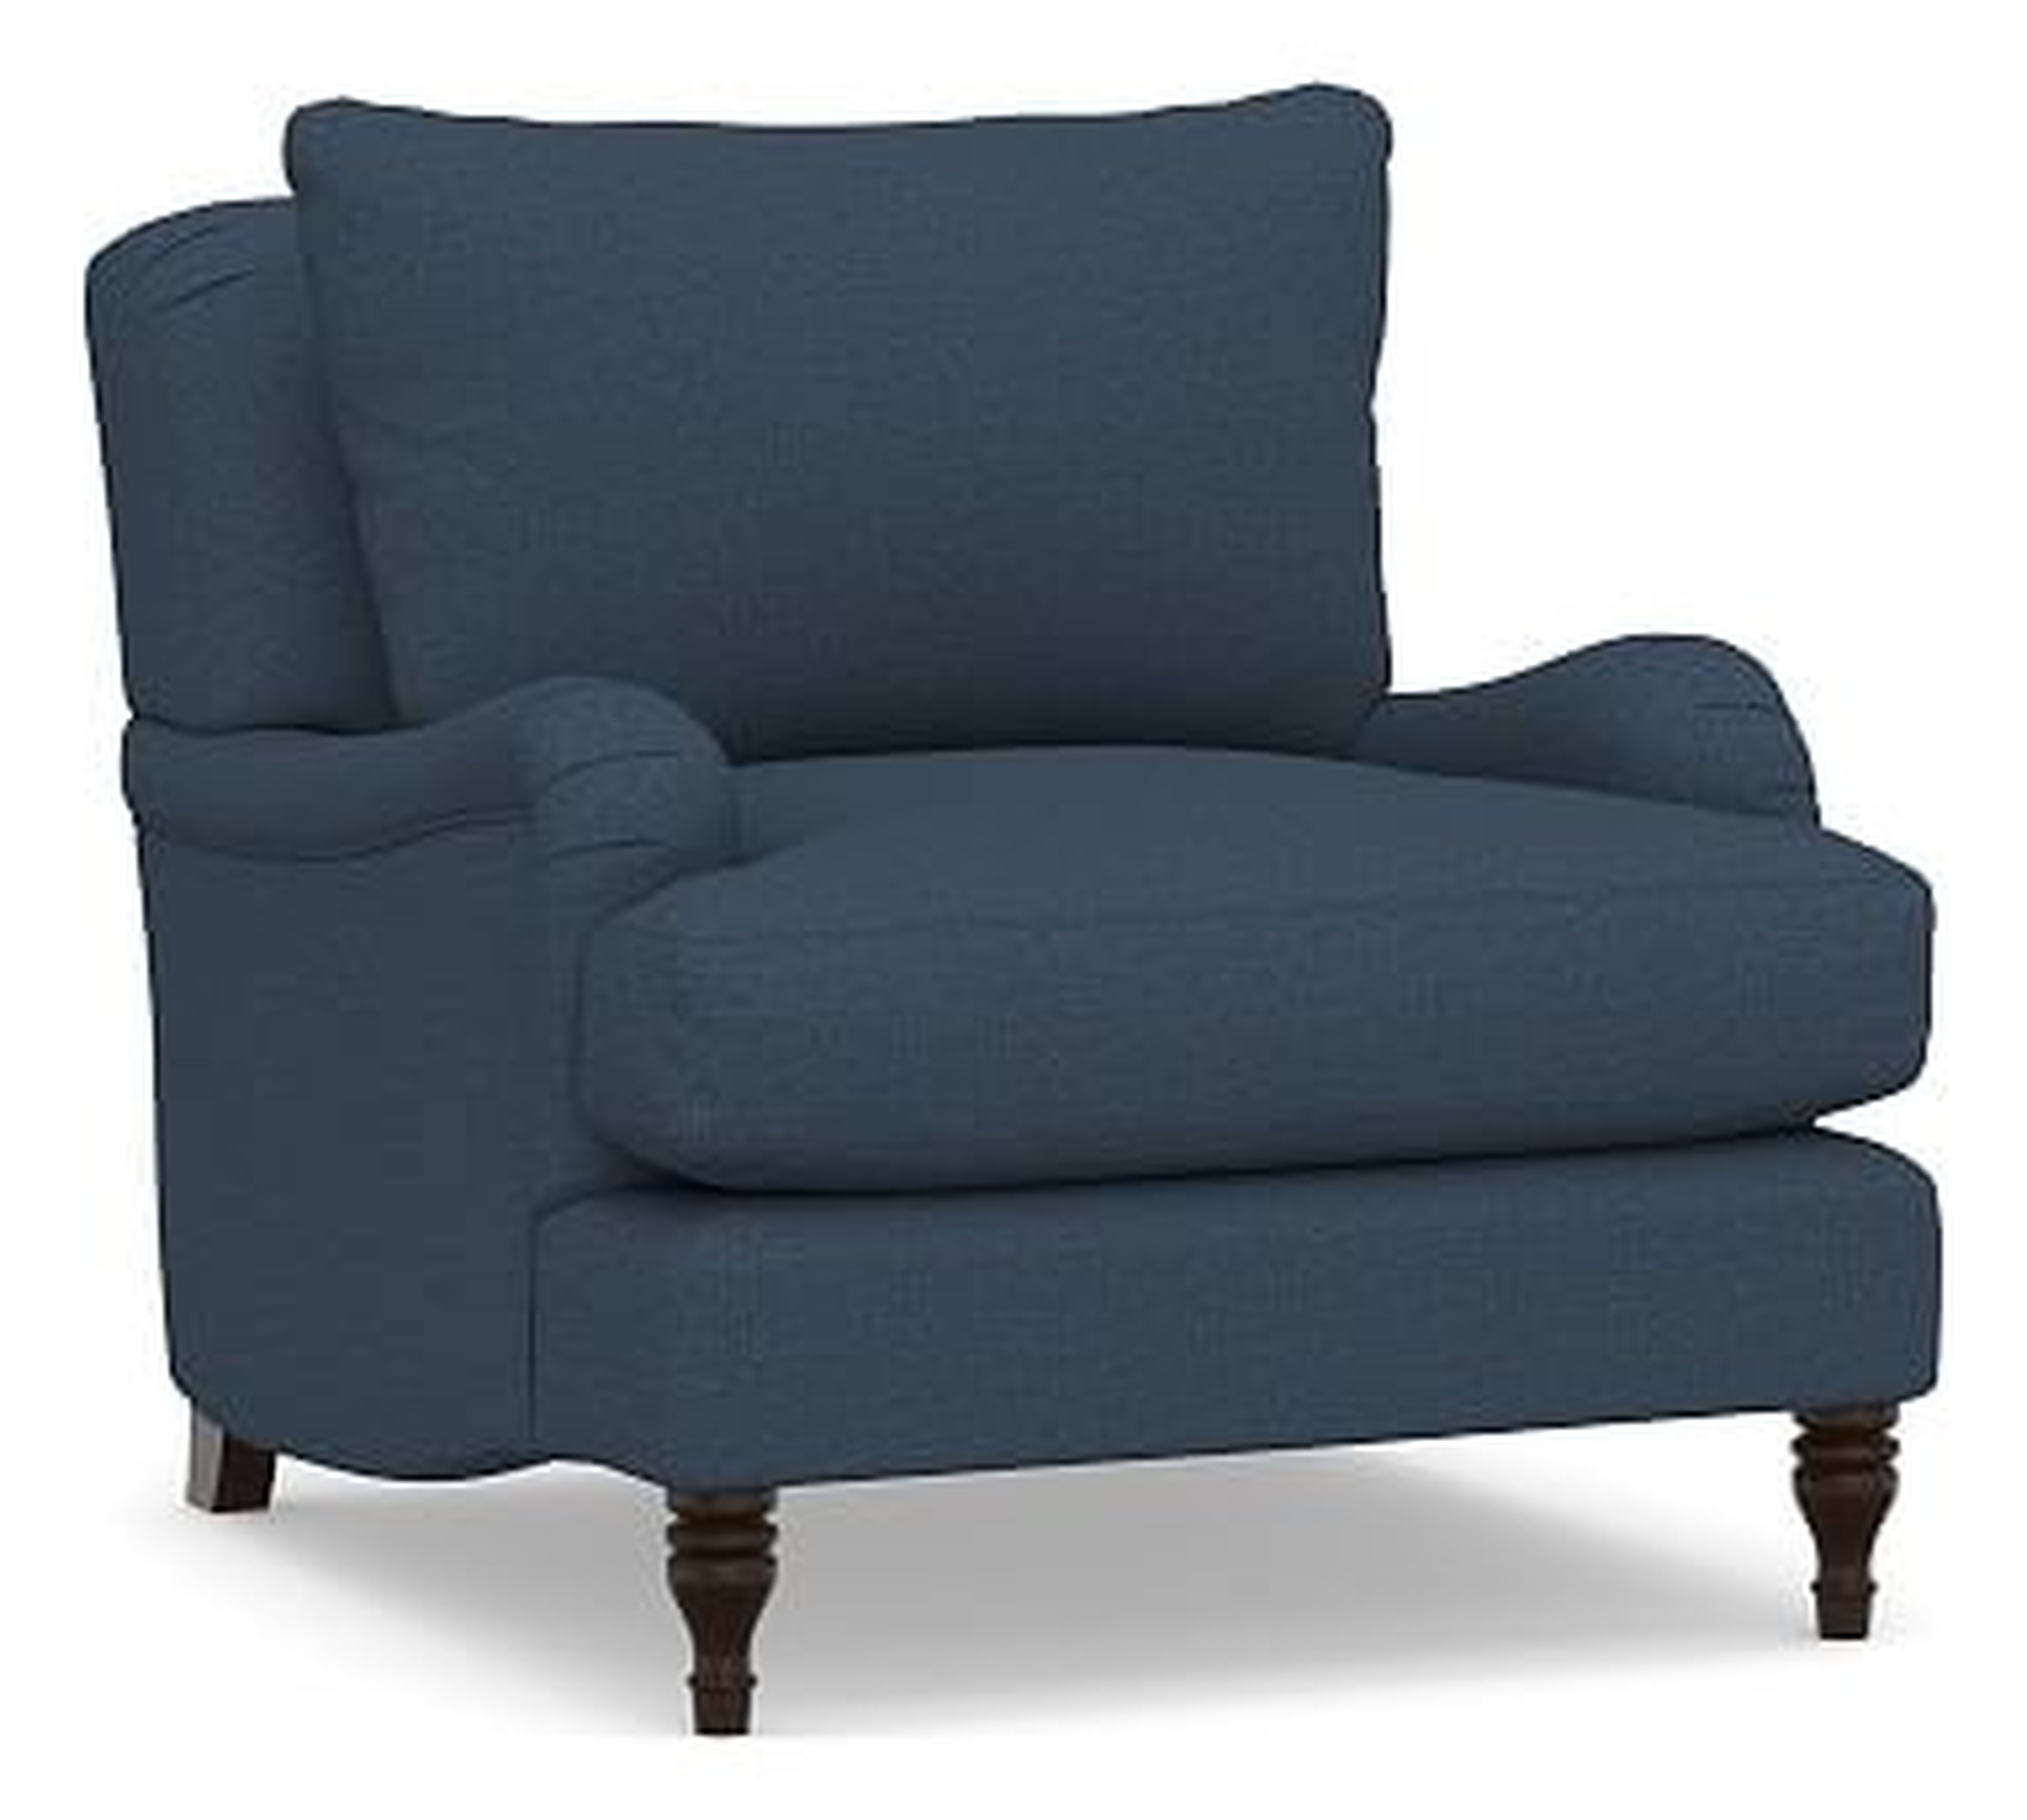 Carlisle English Arm Upholstered Armchair, Polyester Wrapped Cushions, Brushed Crossweave Navy - Pottery Barn